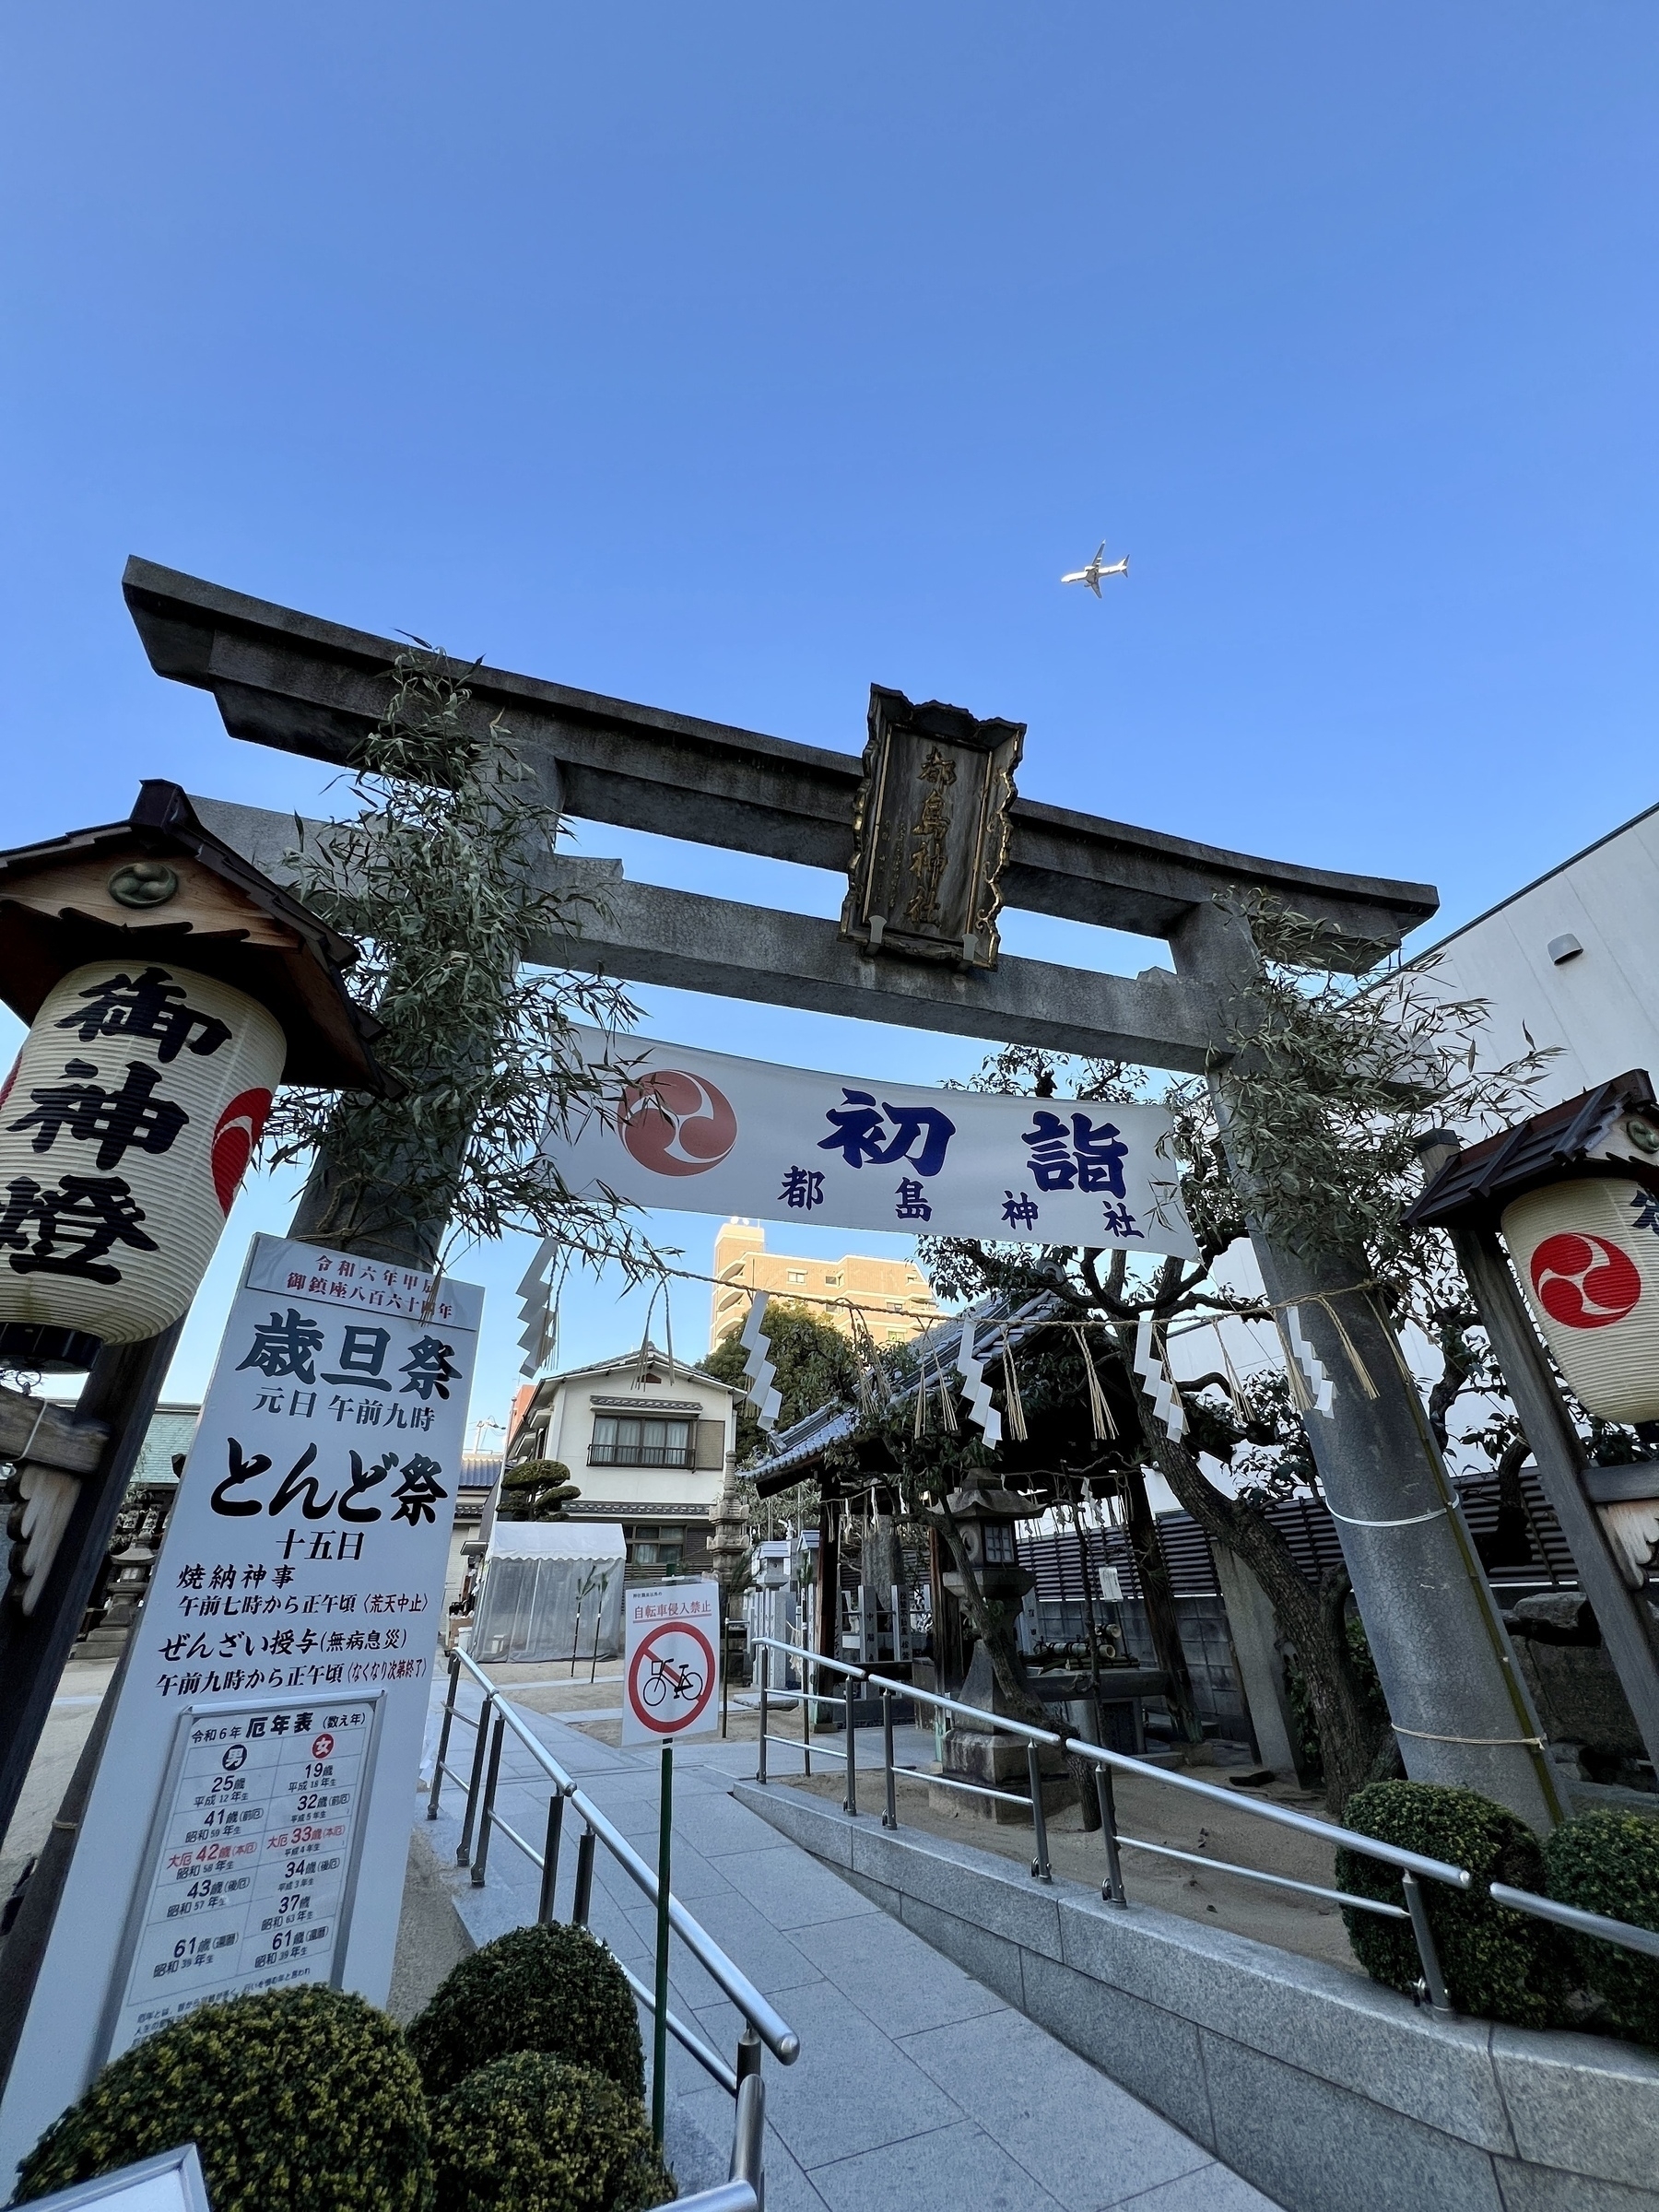 Stone Torii at a shrine with new years decorations. Airplane flies over in the blue sky above